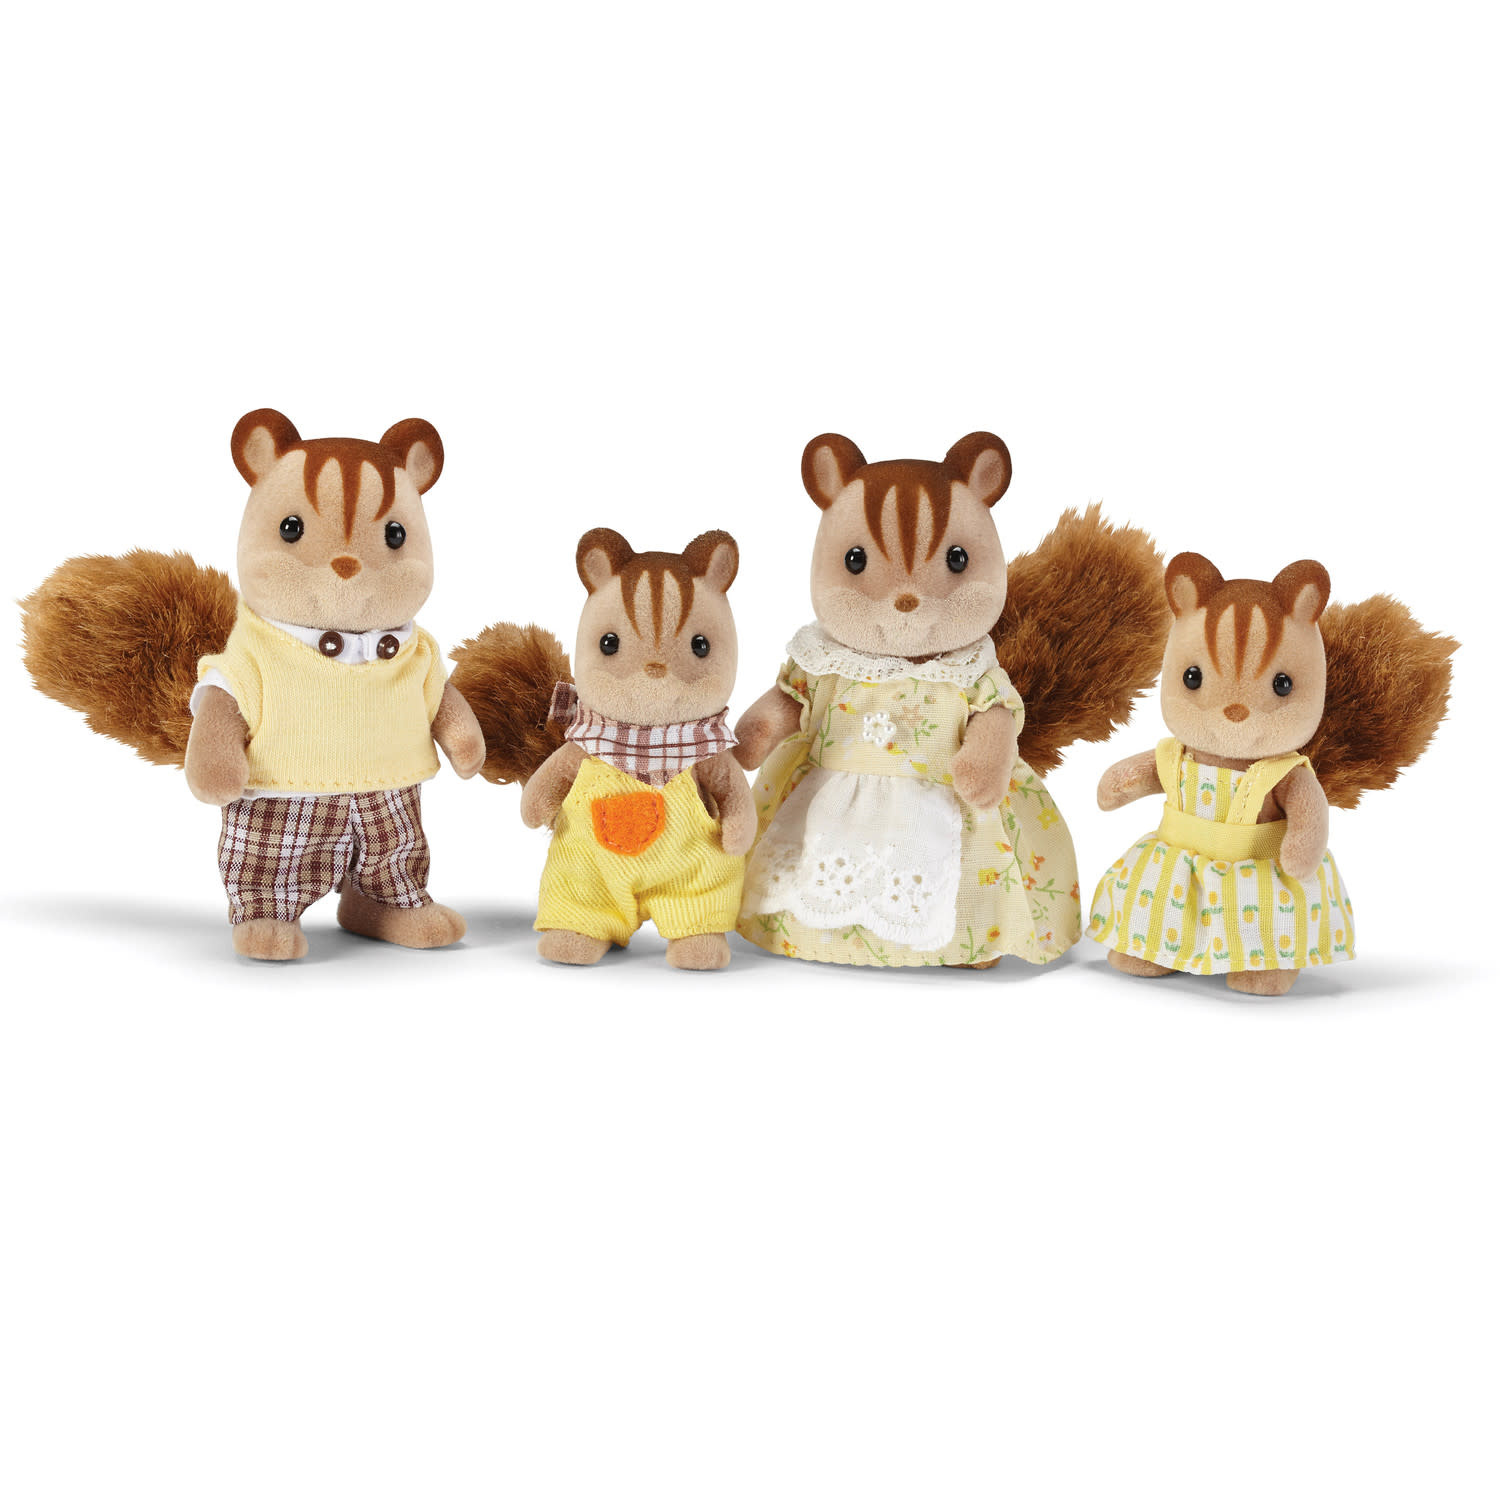 Calico Critters Calico Critters Set of 4 Doll Figures, Chipmunk/Squirrel Family